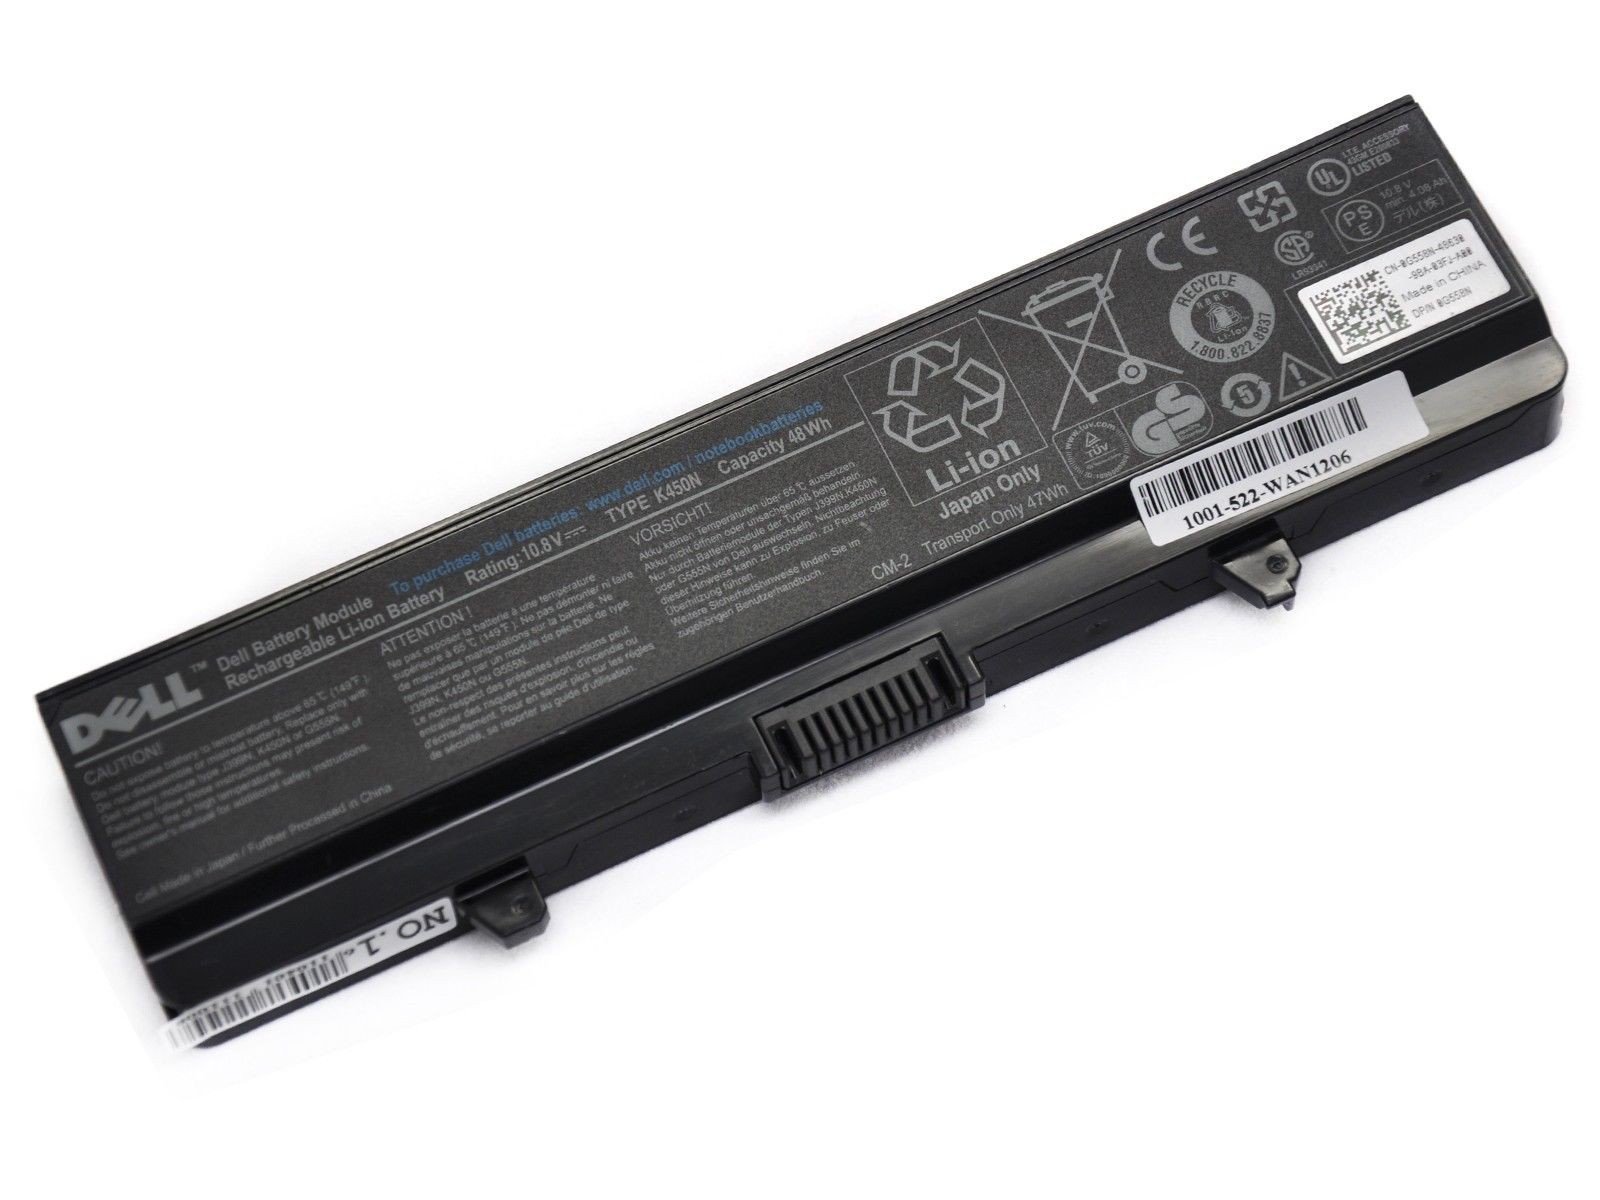 Battery for Laptop Dell Inspiron